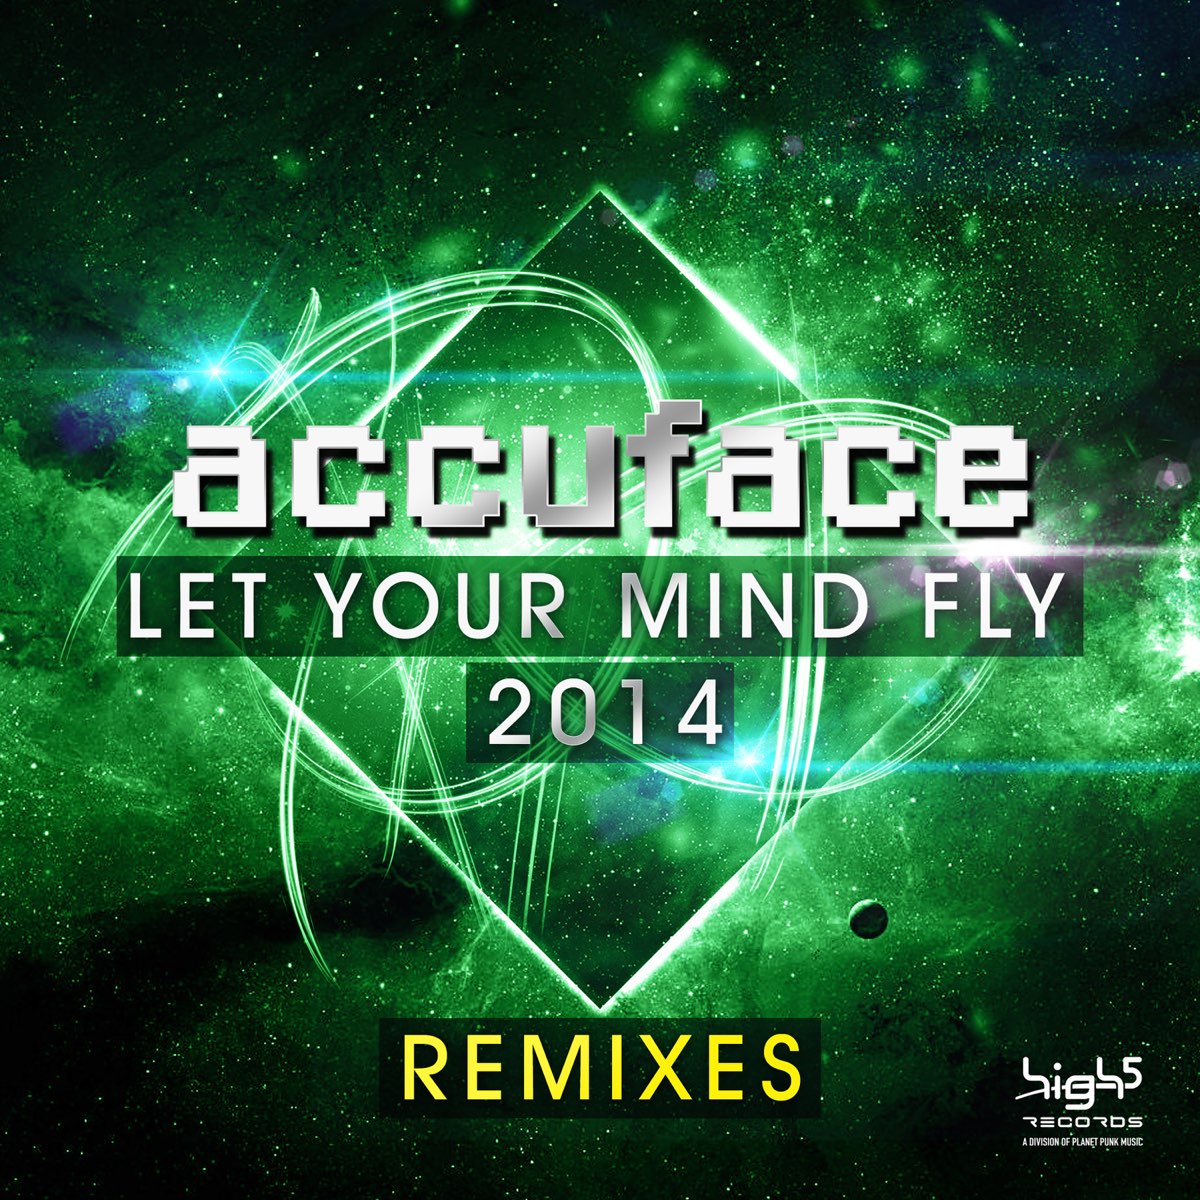 Fly ремикс. Klubbhopping [the Remixes] 2014. Volume 2014 Trance. Mind Fly levdls. A.R.D.I. (Trance).